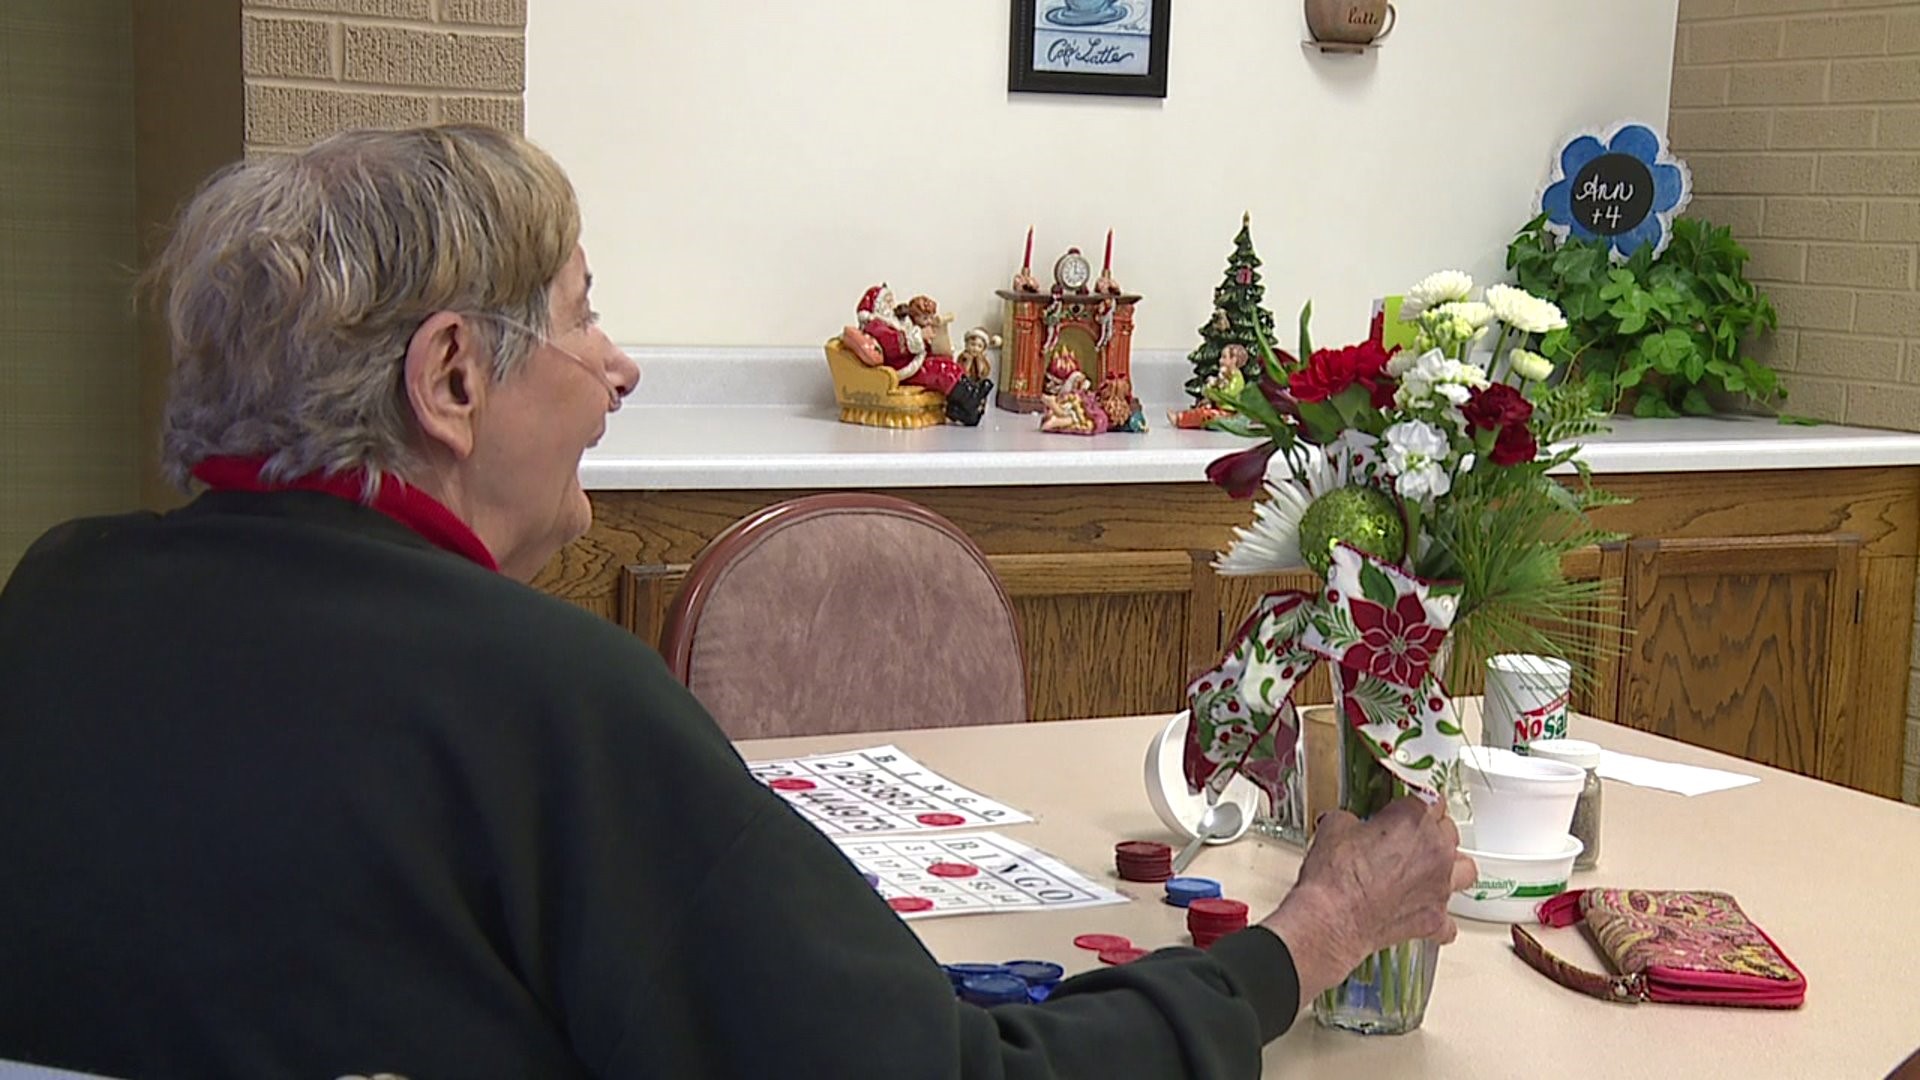 Local florist gifts bouquet for every nursing home resident in two Illinois cities